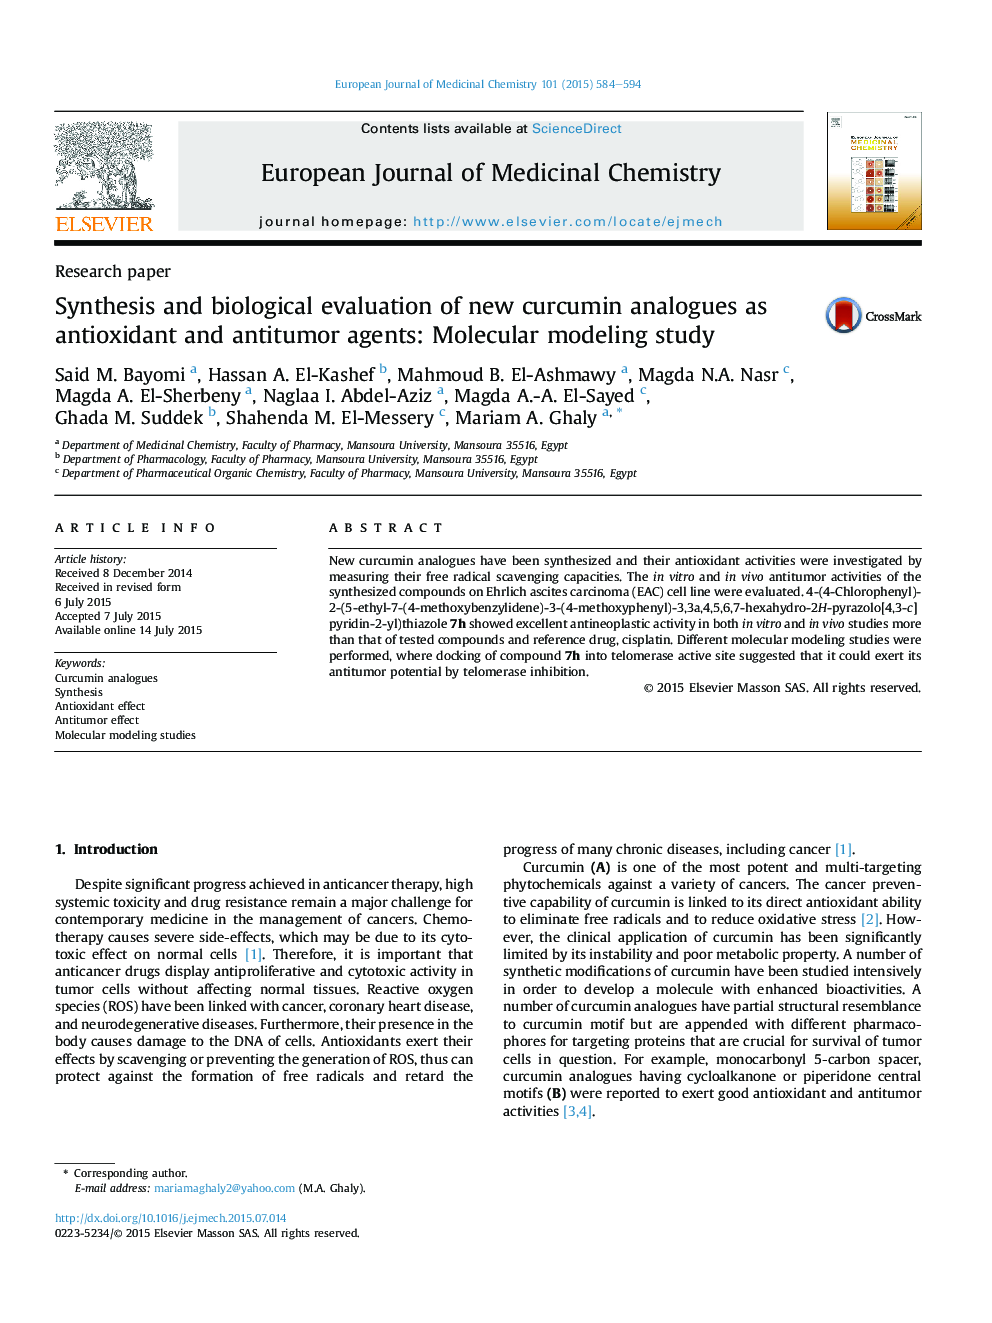 Synthesis and biological evaluation of new curcumin analogues as antioxidant and antitumor agents: Molecular modeling study